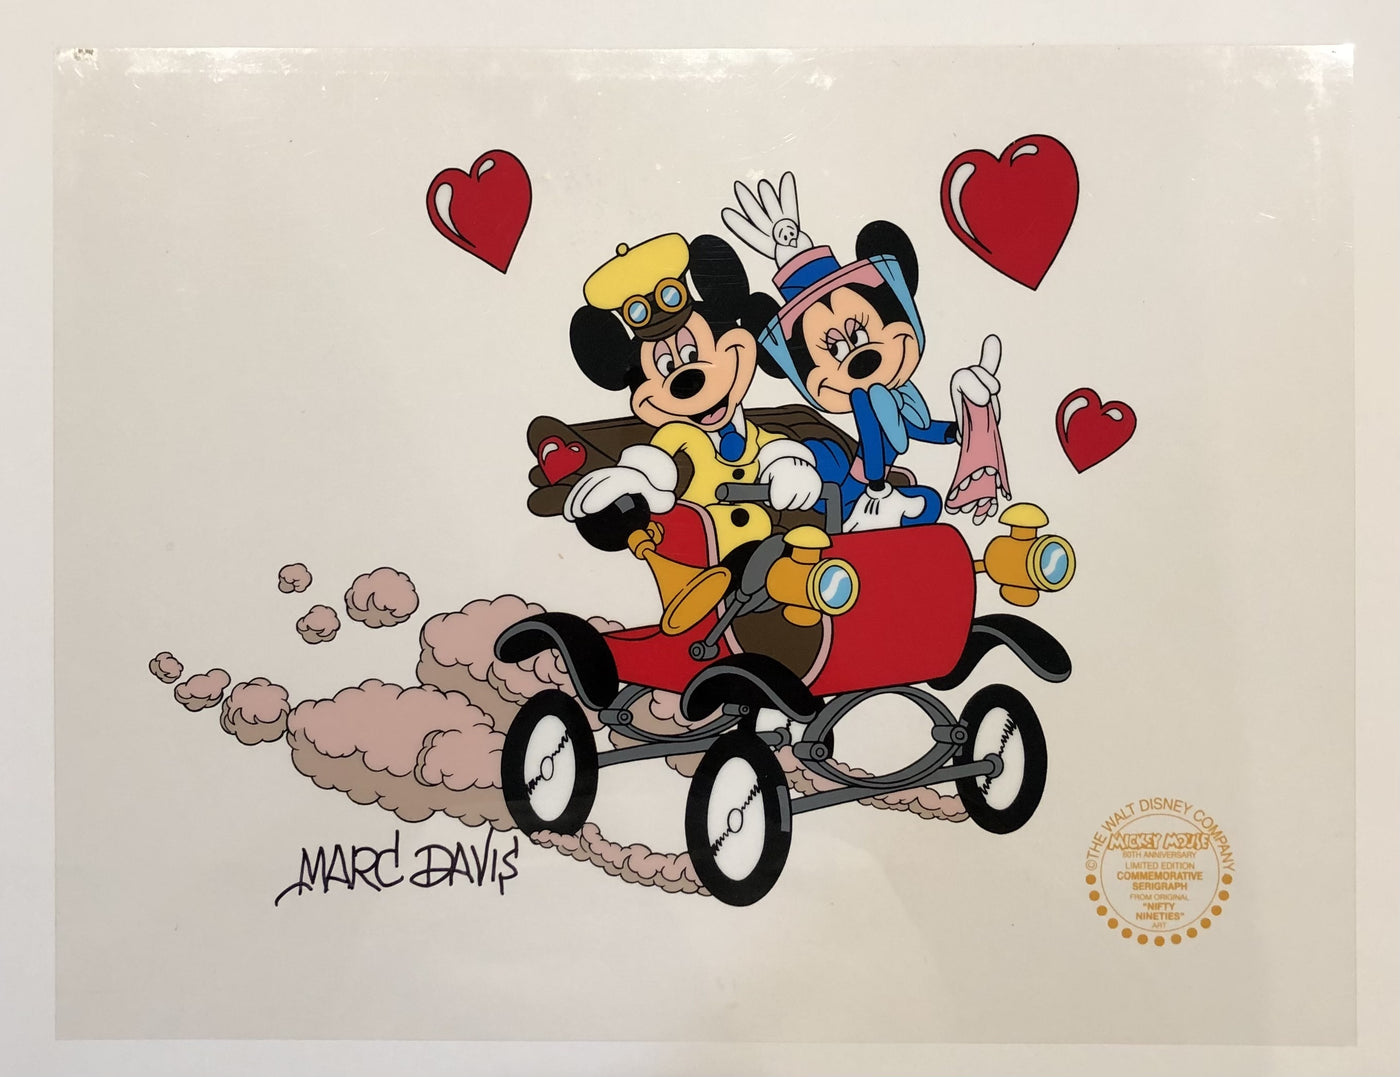 Limited Edition Walt Disney Mickey Mouse "Nifty Nineties" Commemorative Serigraph Cel